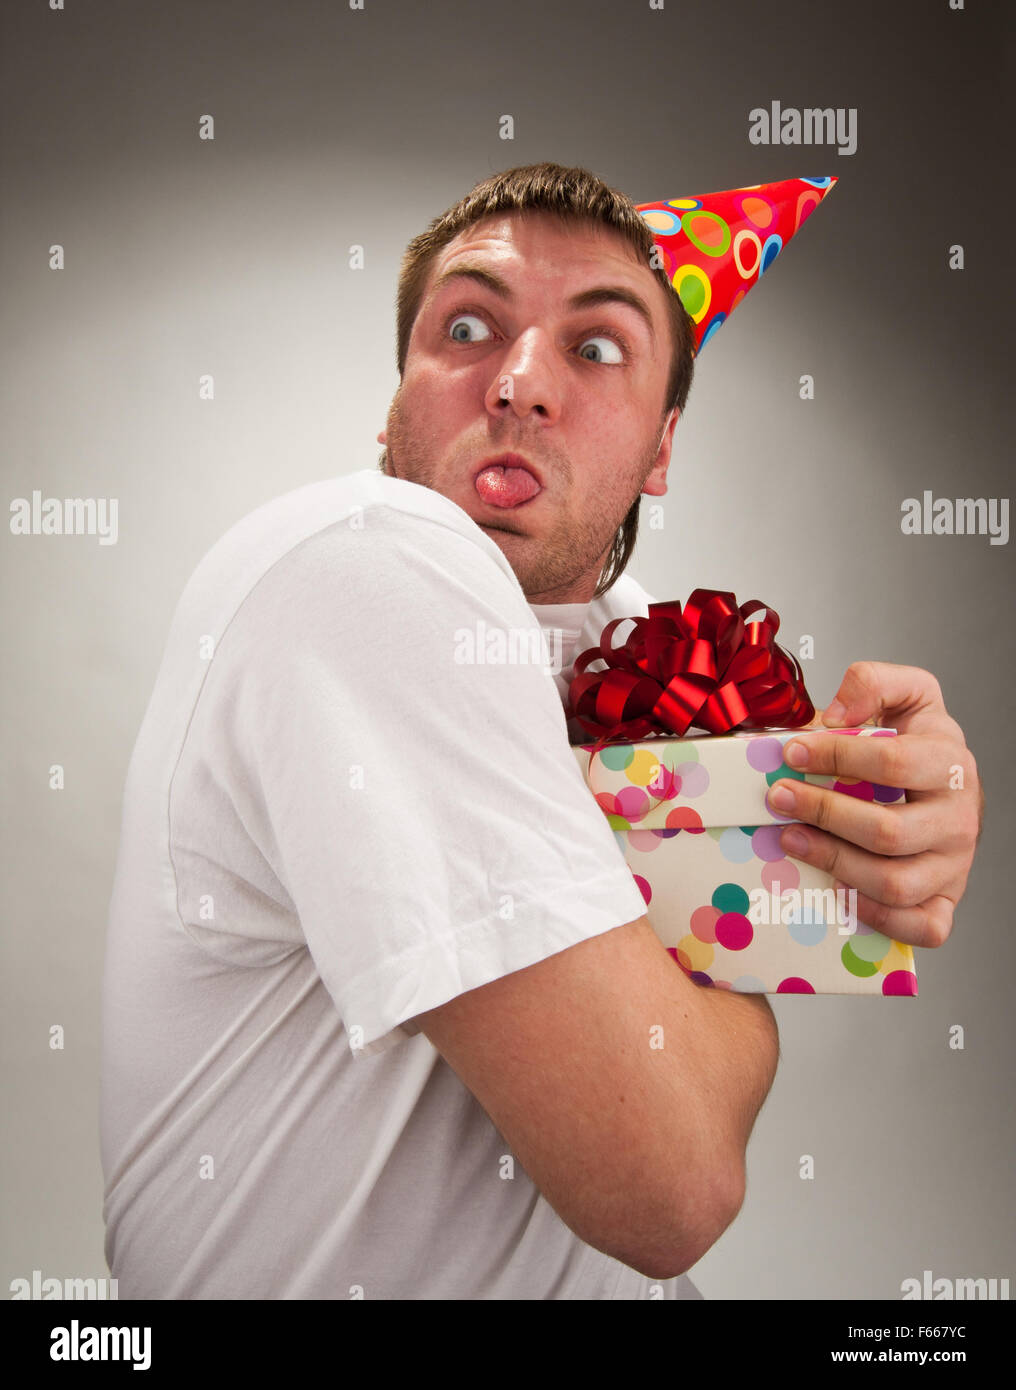 Funny birthday man with gift making face Stock Photo